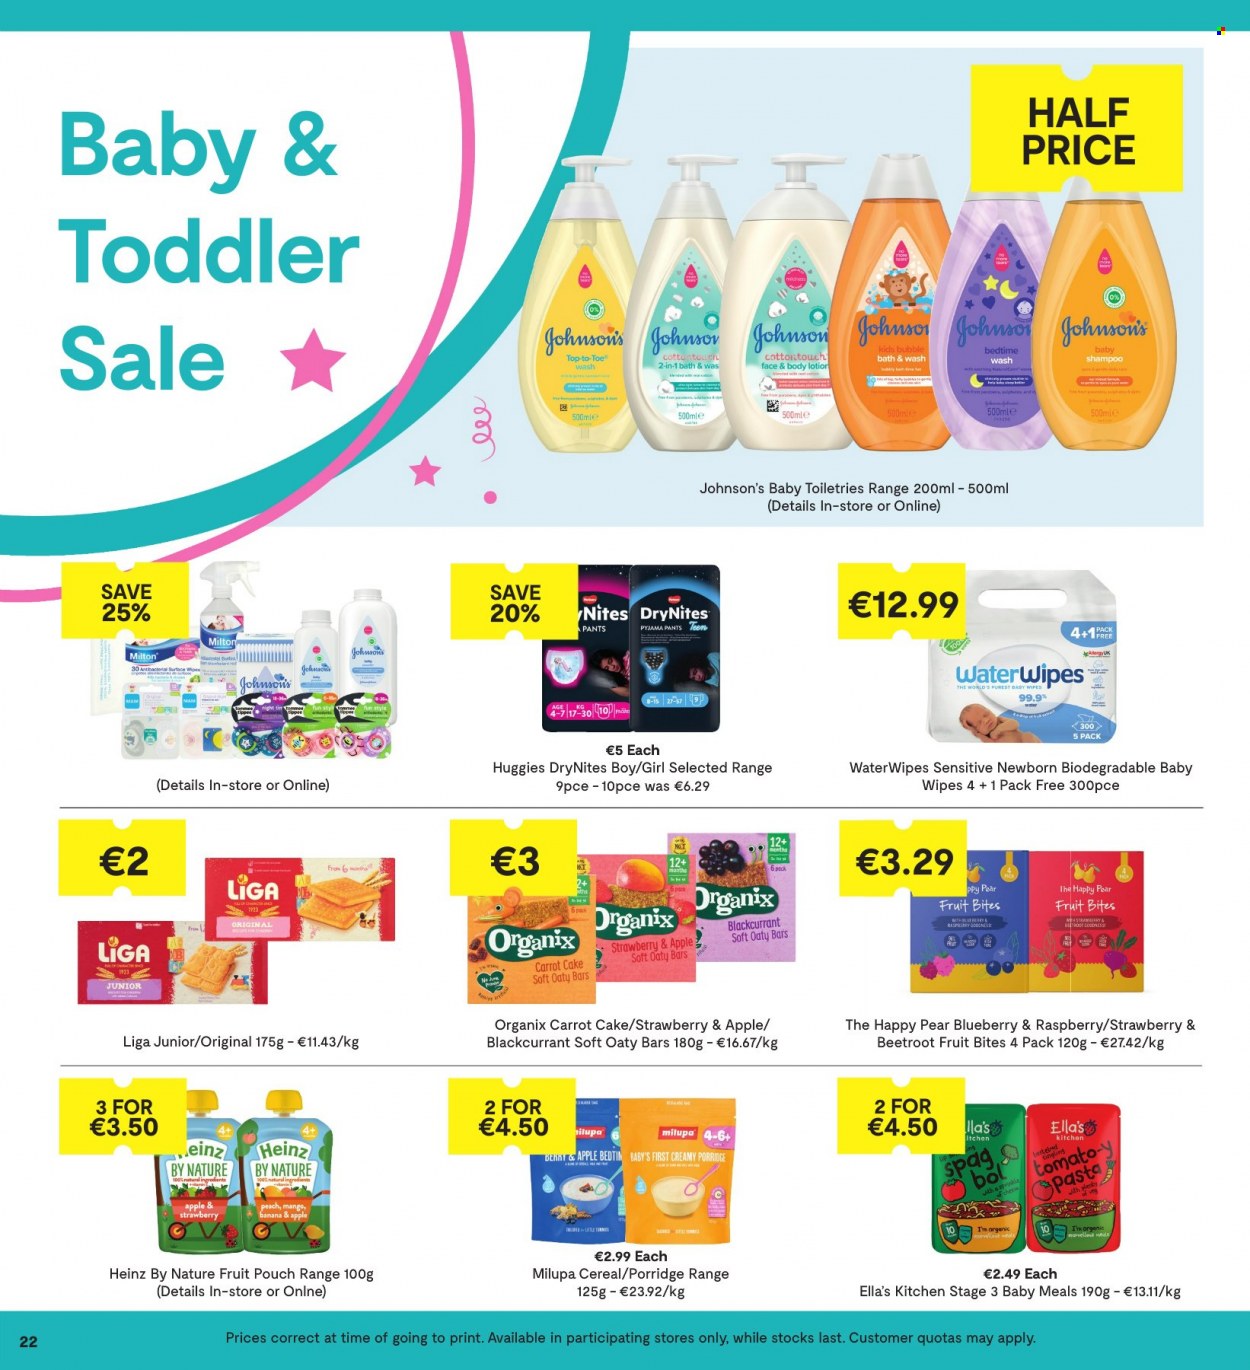 thumbnail - SuperValu offer  - 22.09.2022 - 05.10.2022 - Sales products - cake, pears, pasta, Heinz, cereals, porridge, wipes, Huggies, pants, baby wipes, DryNites, Johnson's, Plenty, bubble bath, shampoo, body lotion. Page 22.